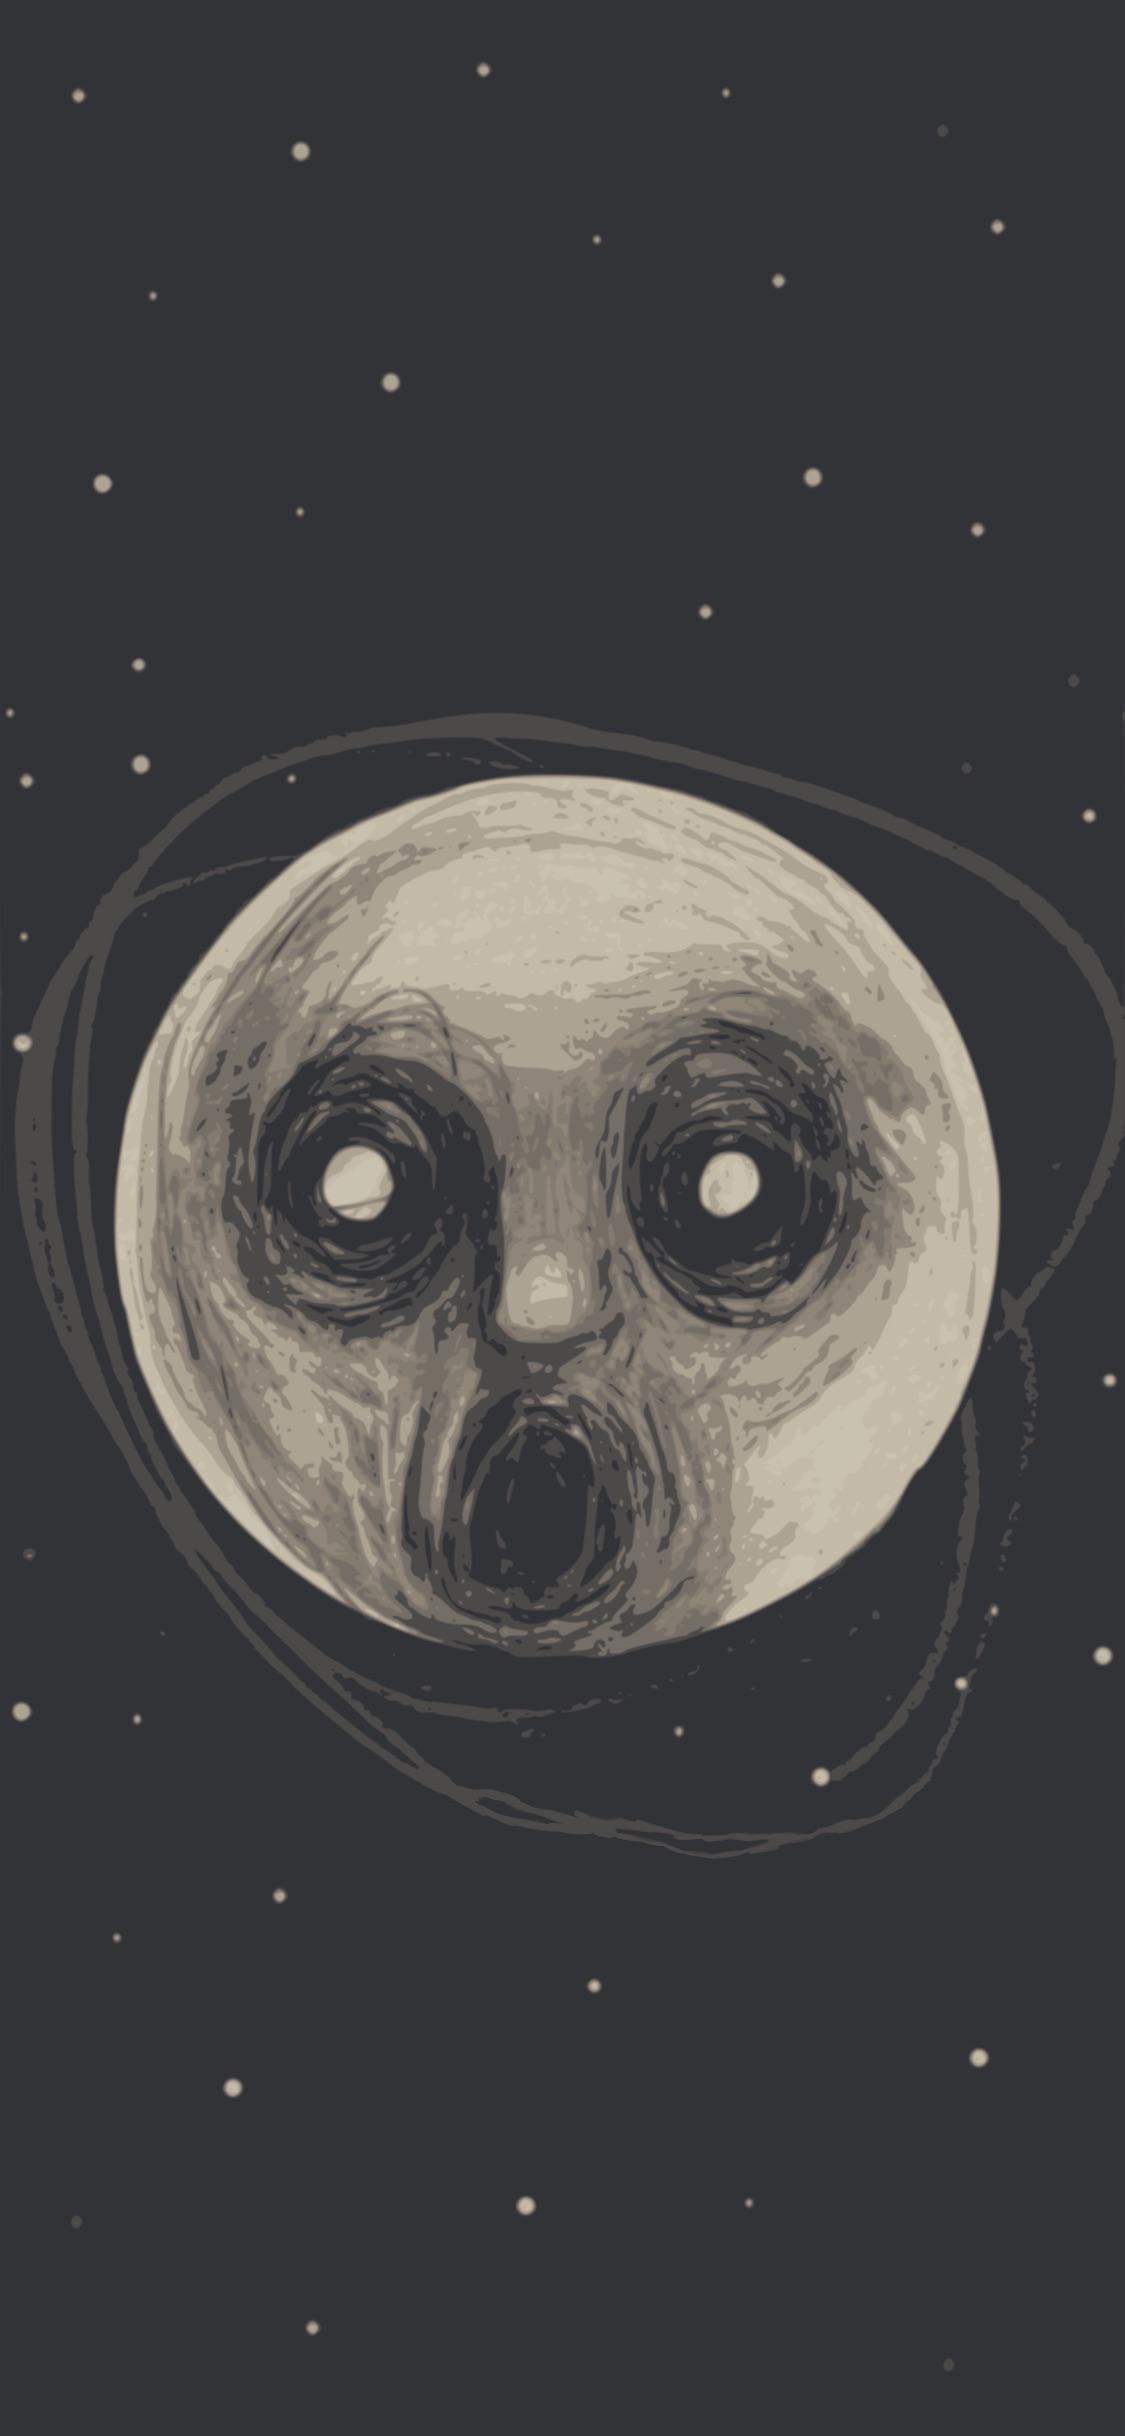 A drawing of an alien face on the moon - Alien, vector